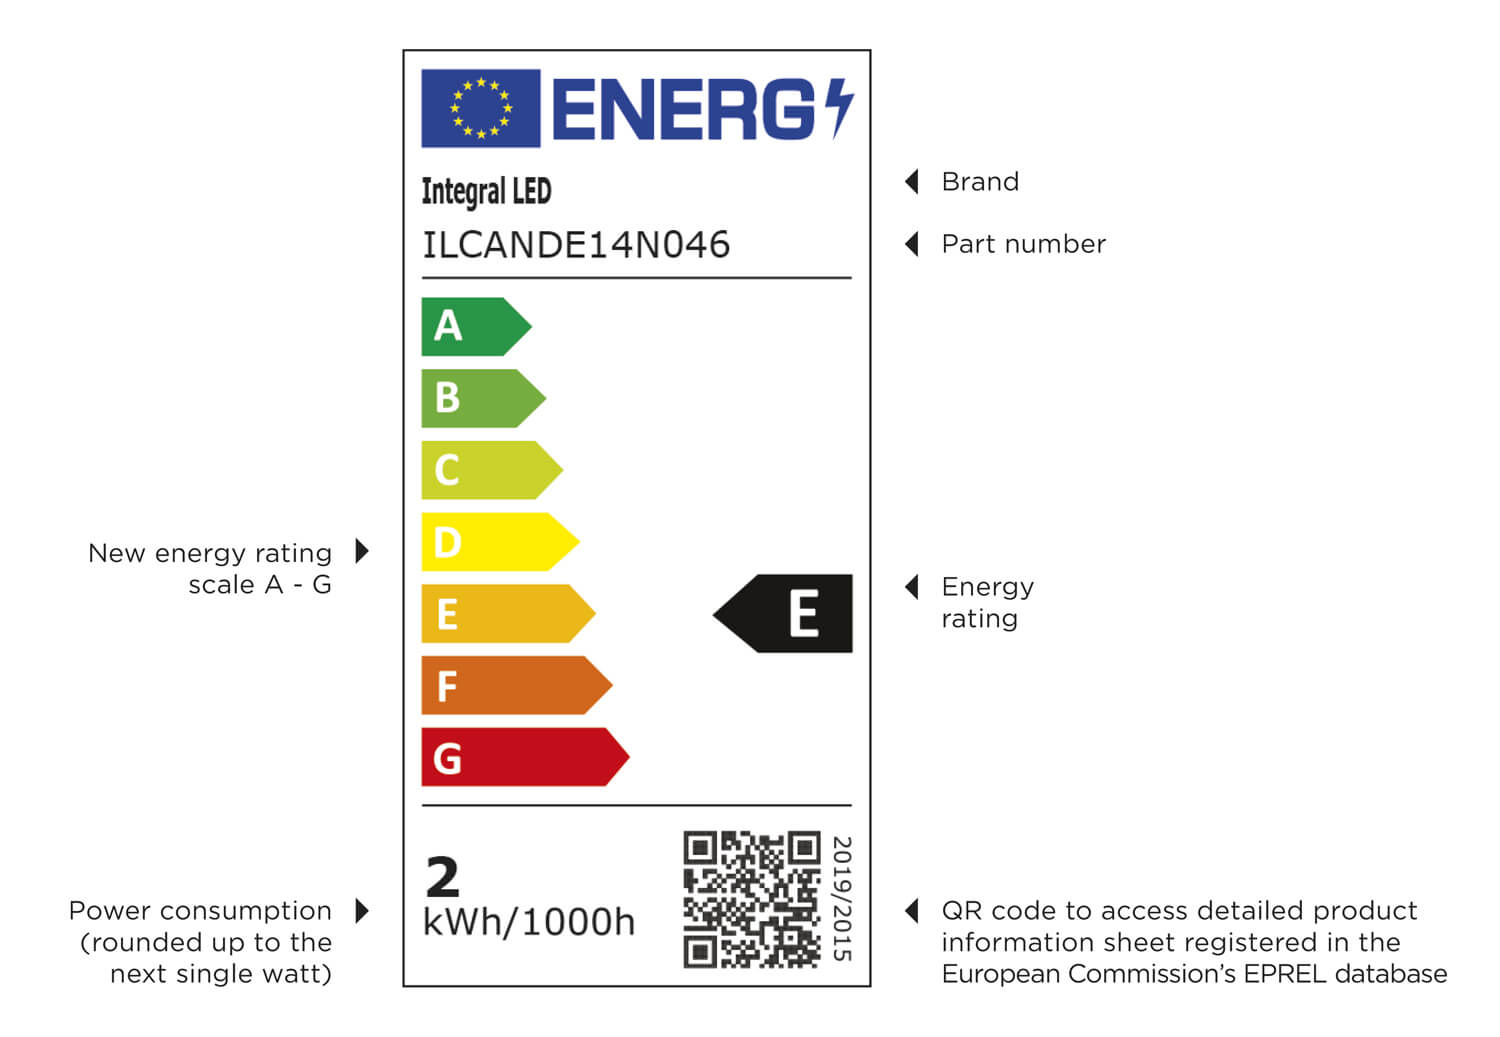 EU energy label with explanations for brand, part number, scale, rating, power consumption and QR code